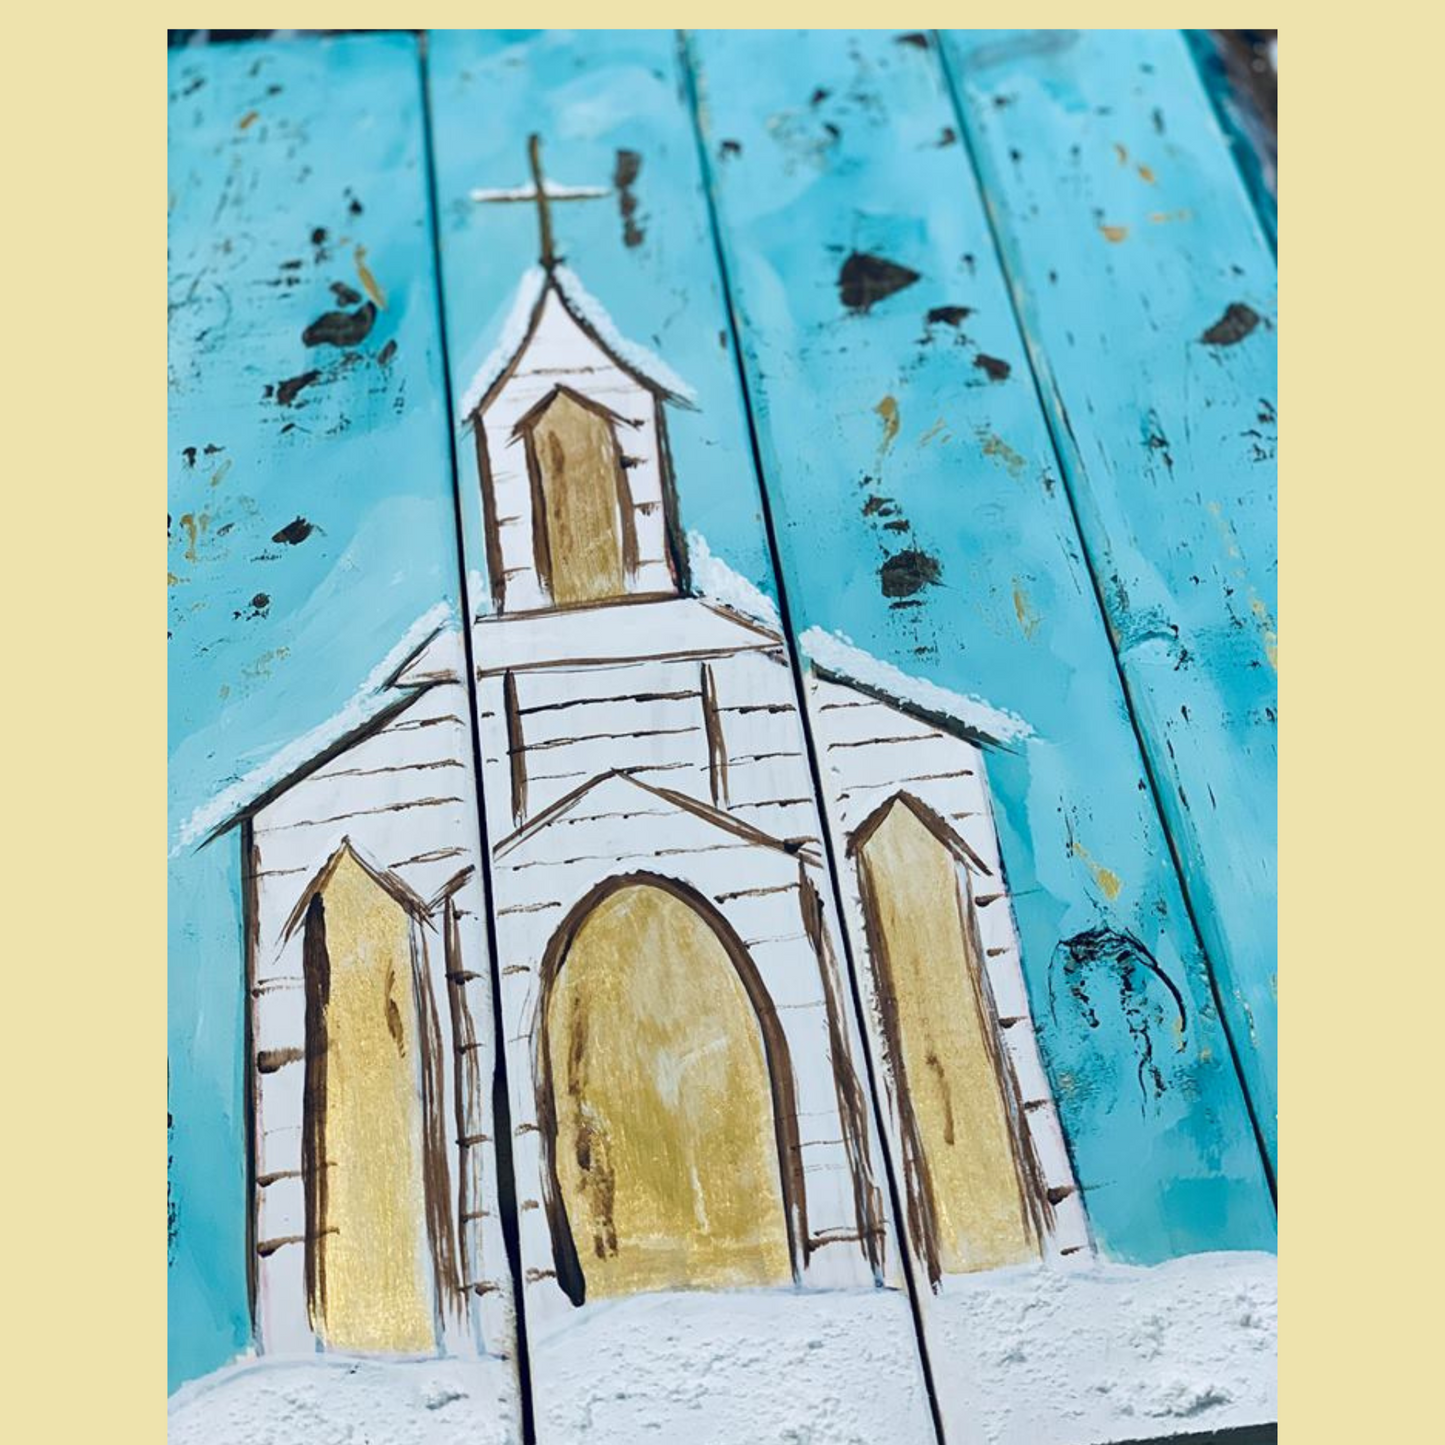 Winter Chapel Complete Paint Night Art Party Kits for at Home Paint and Sip